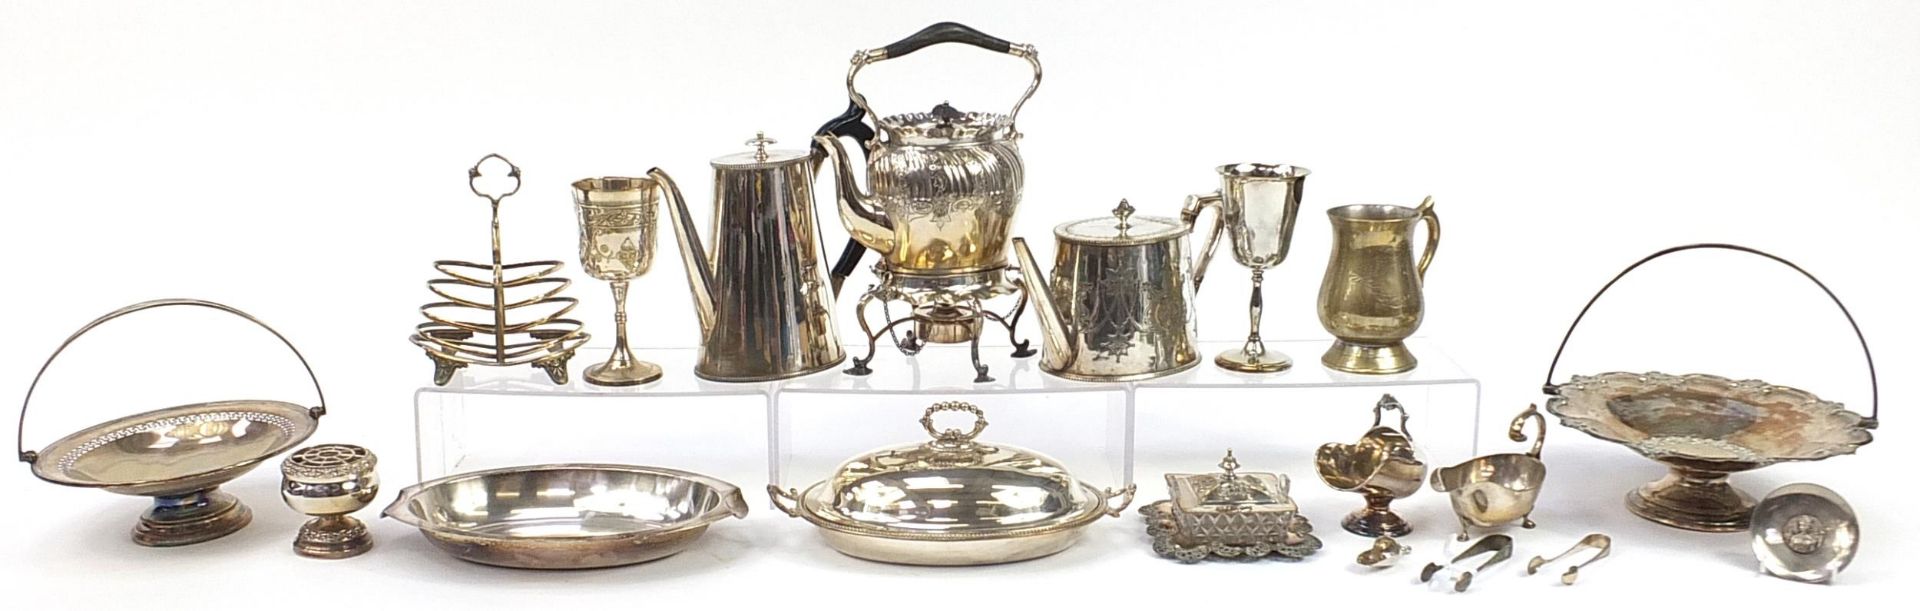 Antique and later silverplate including a Victorian teapot on stand, fruit baskets with swing